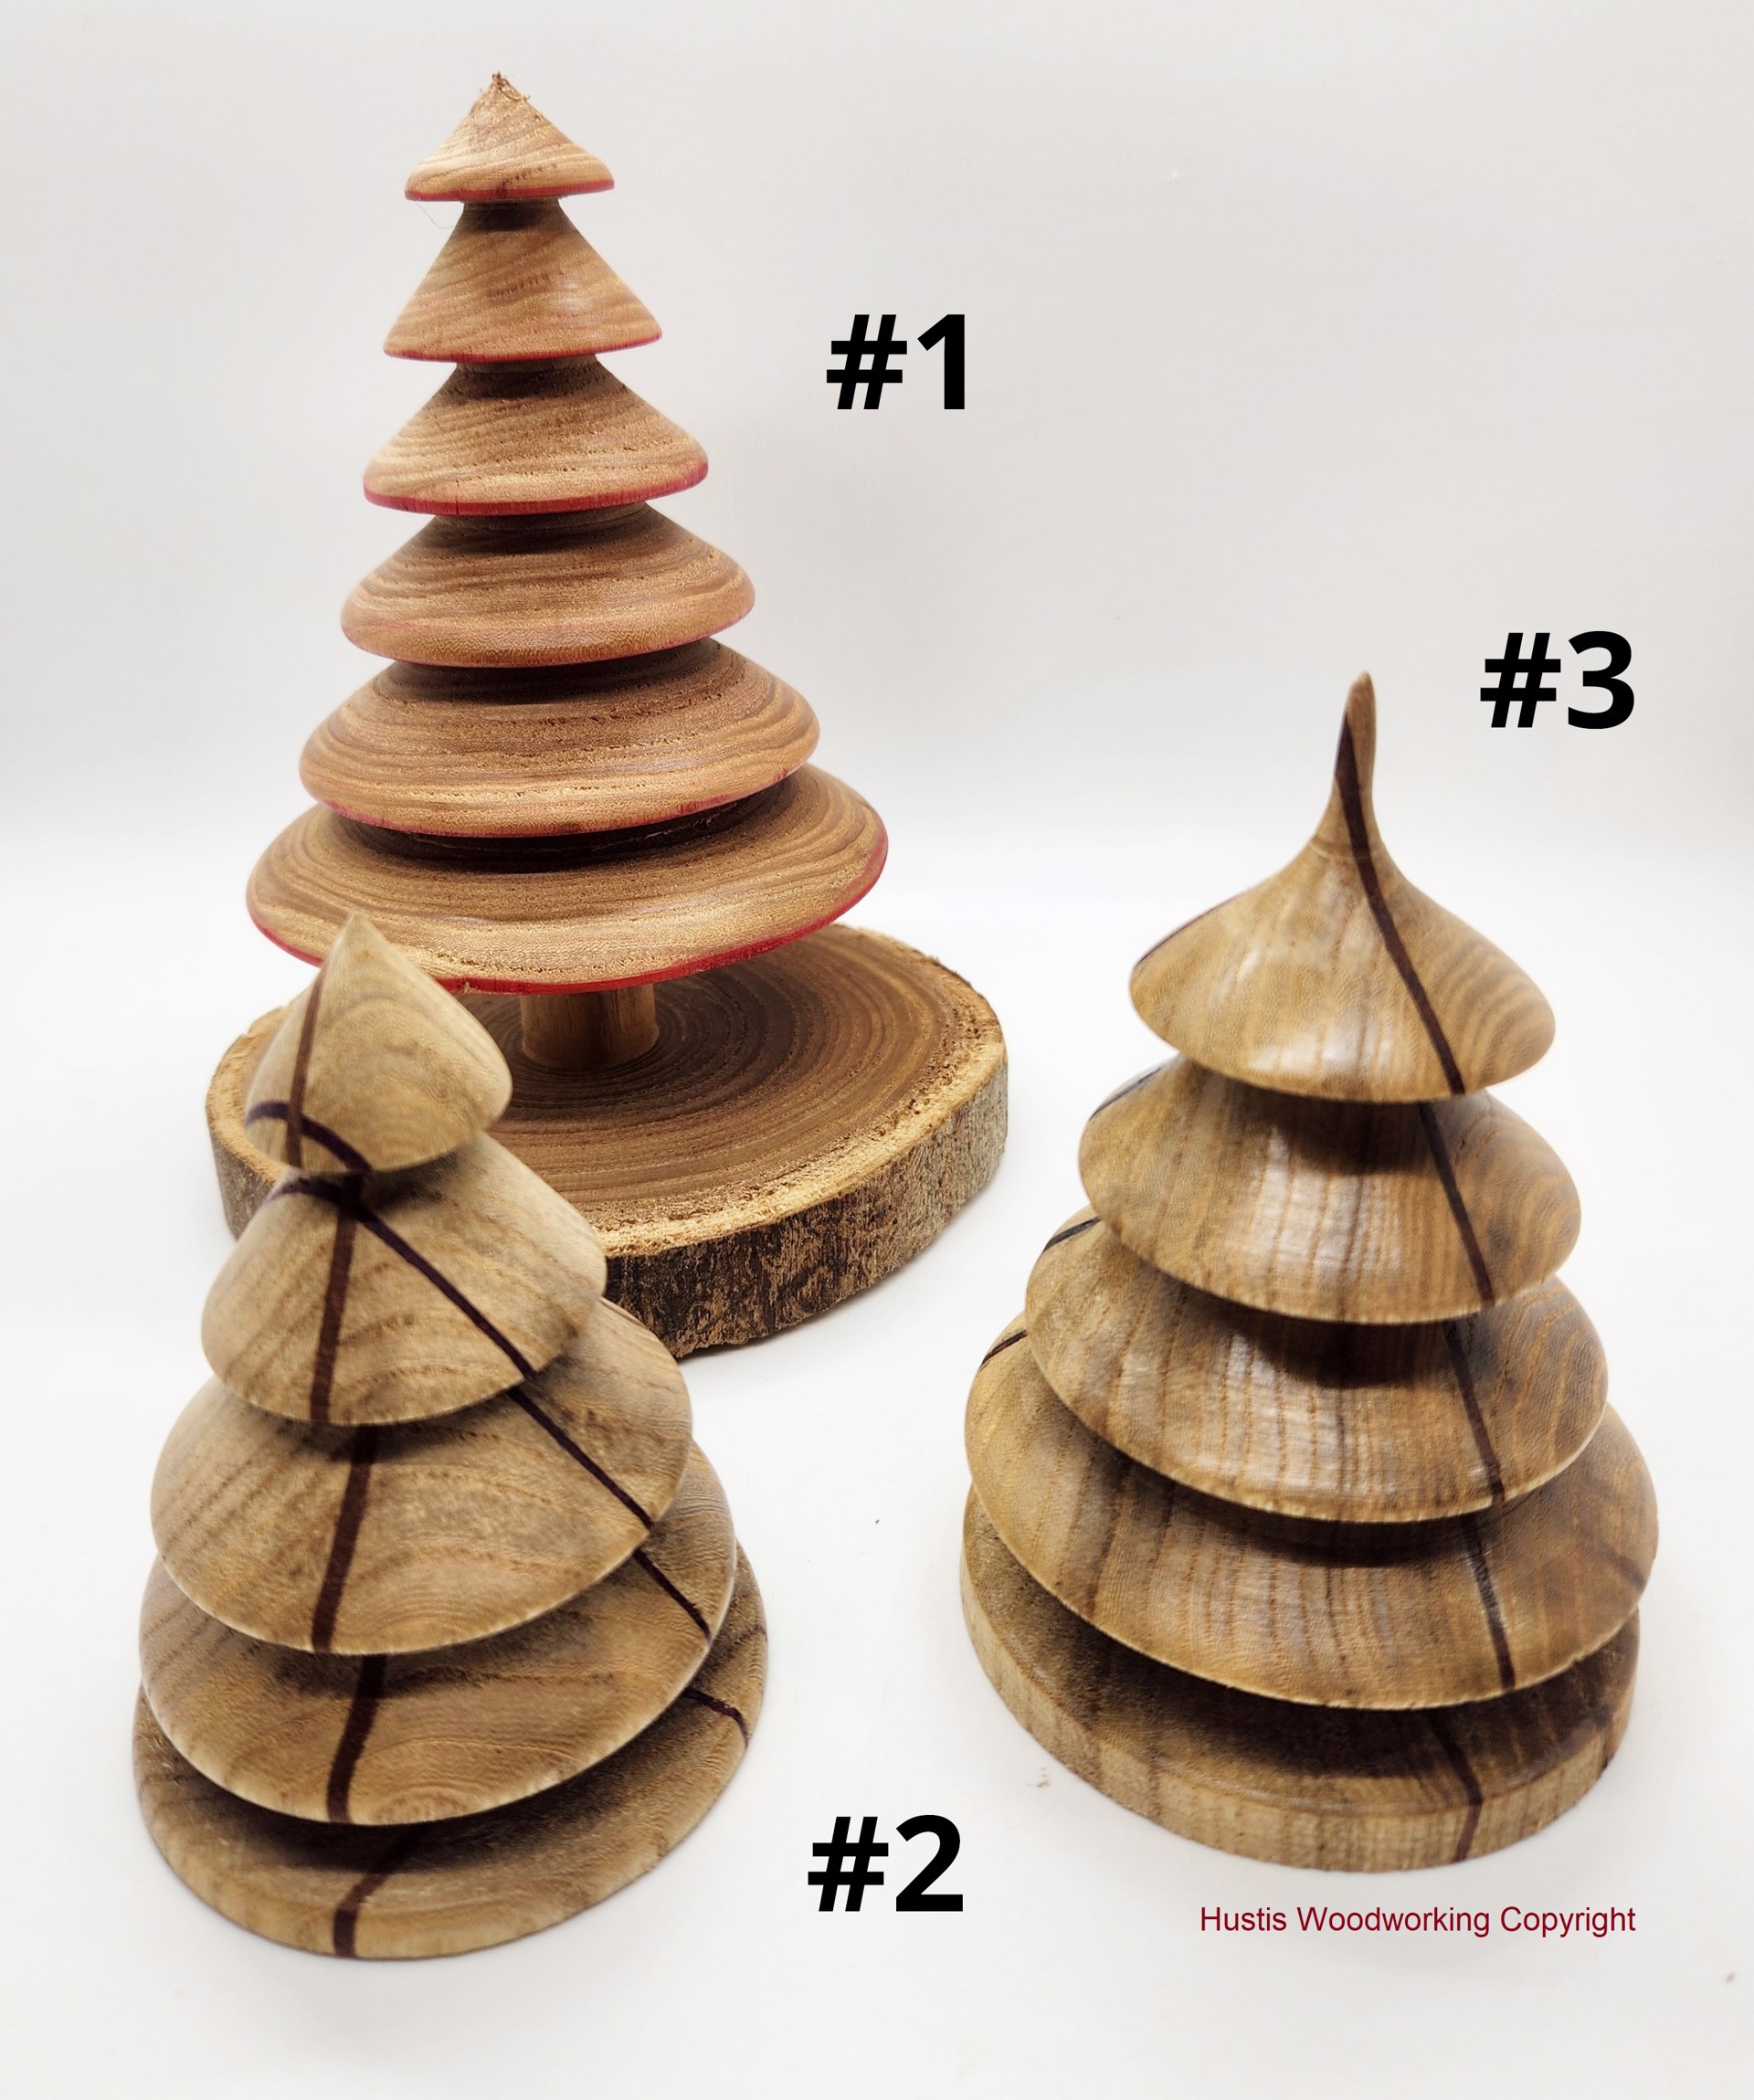 Woodturned Christmas Trees #2 by Mark Hustis